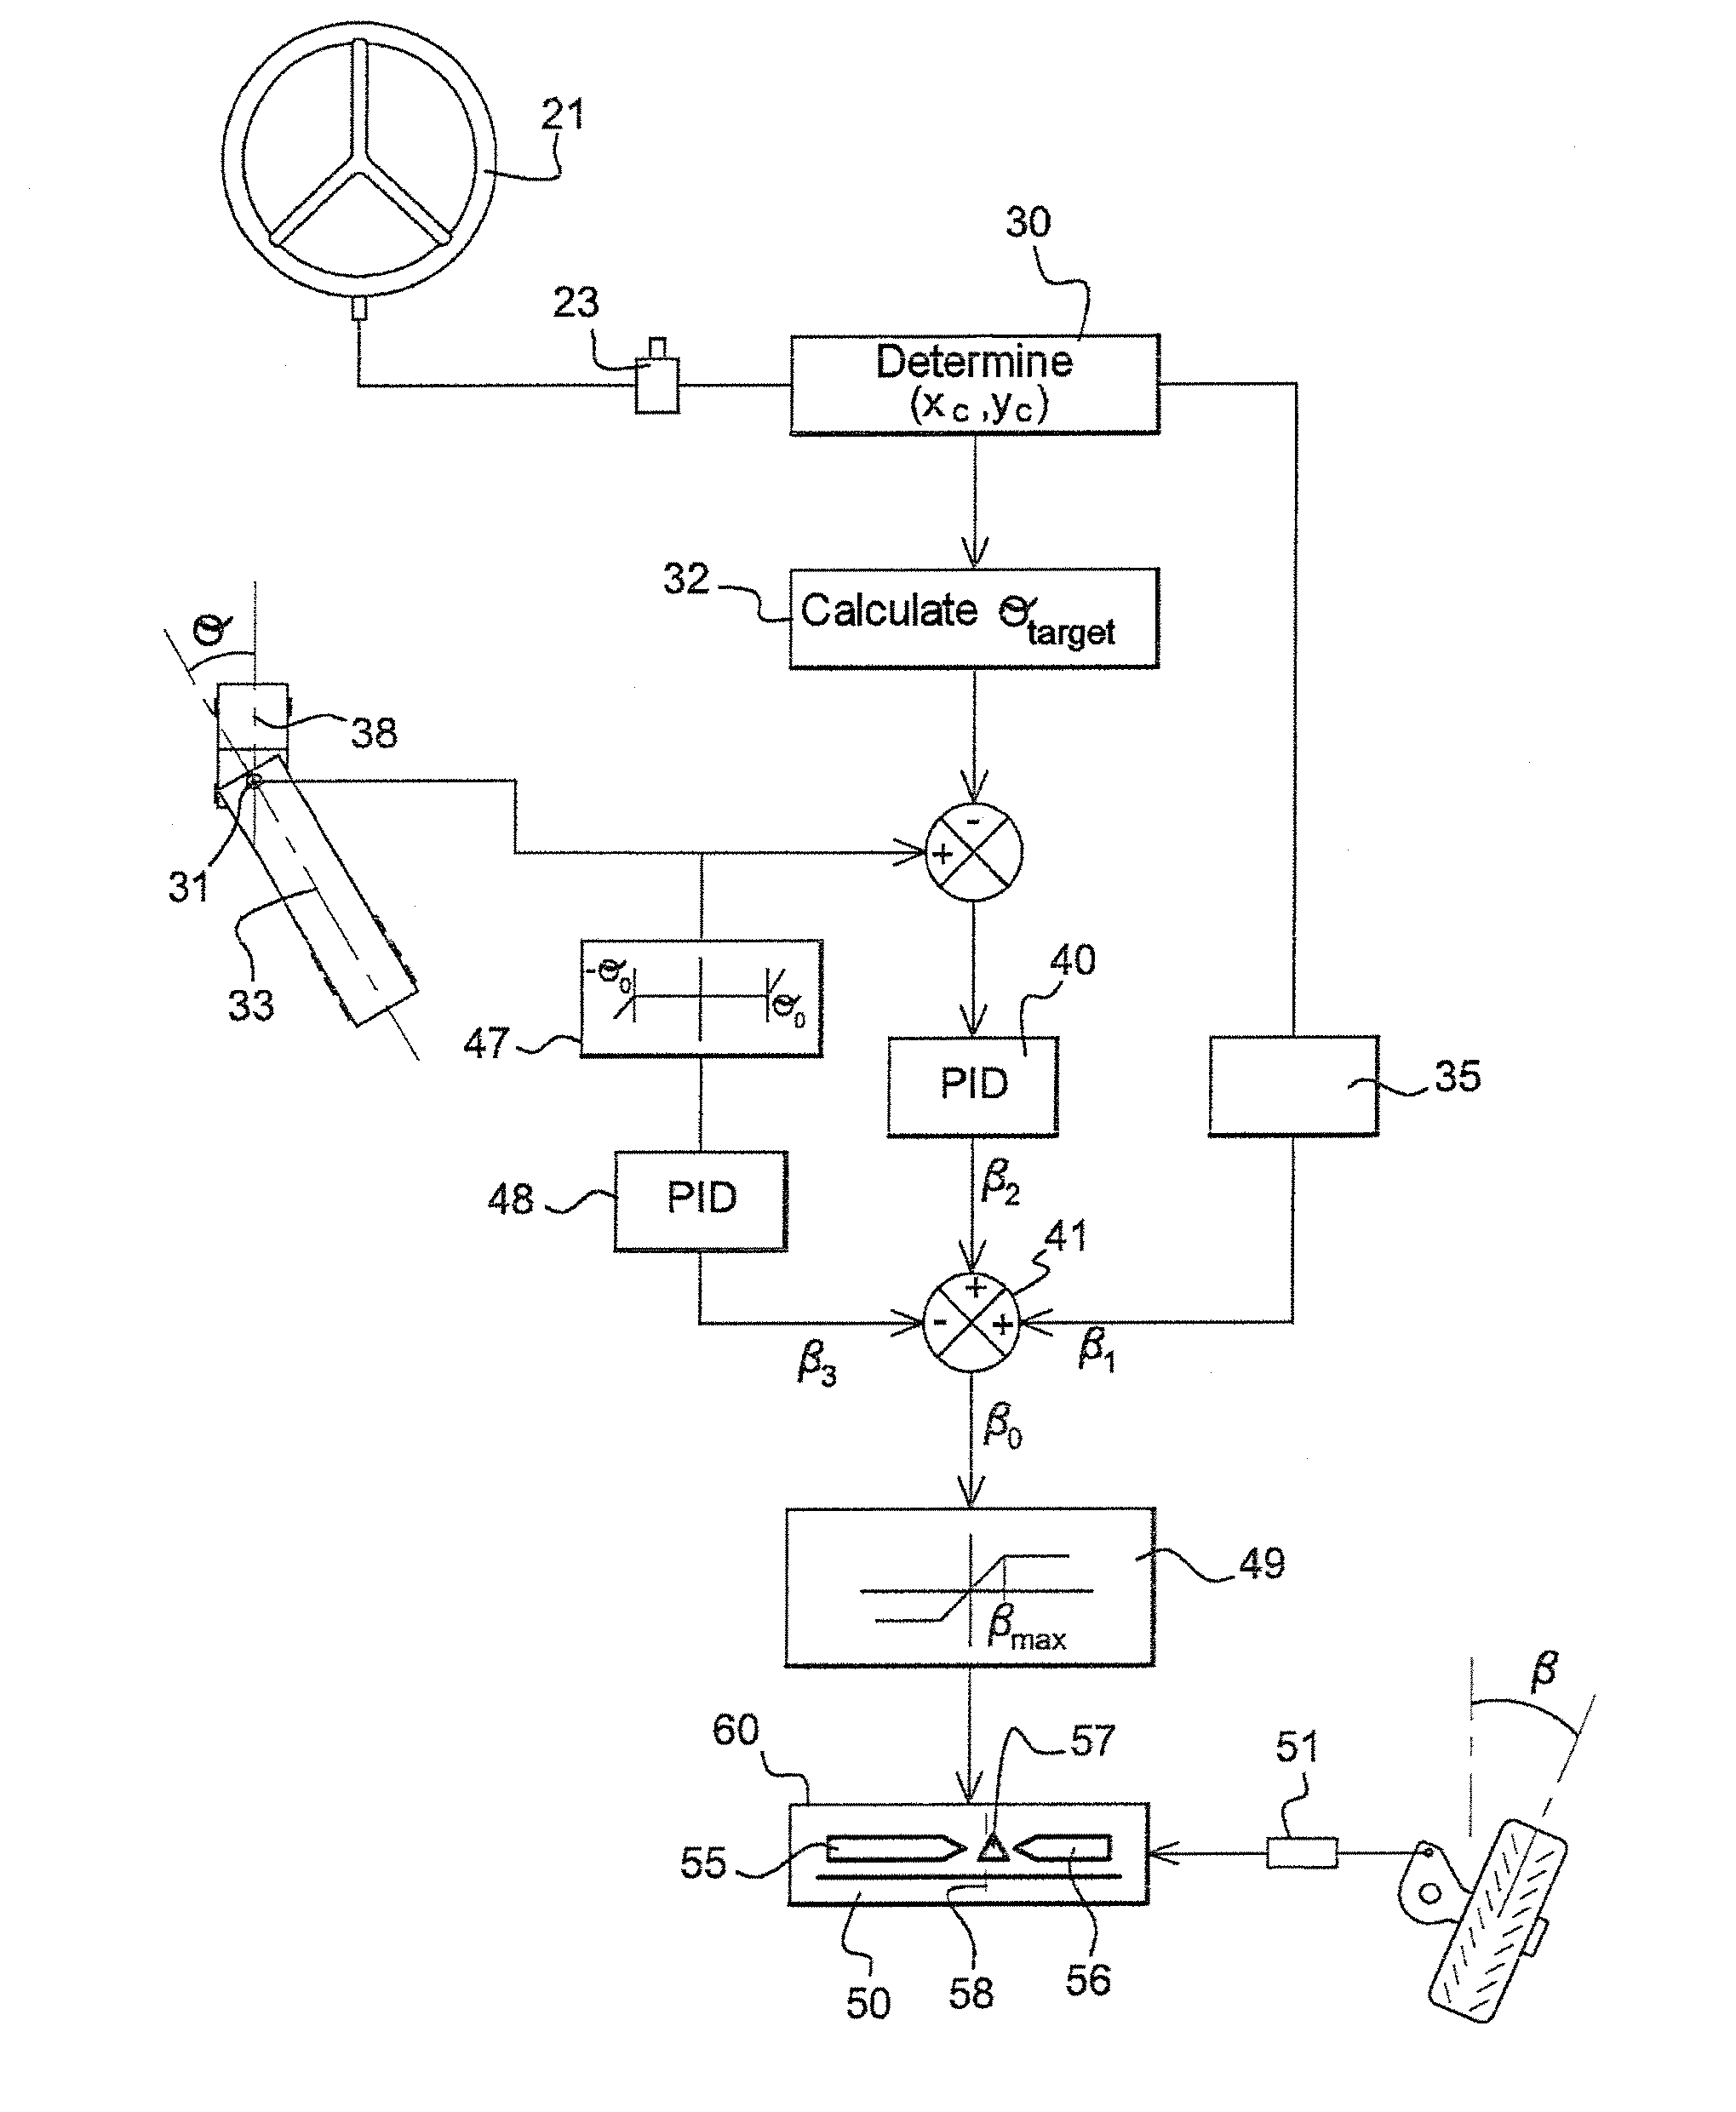 Method for Controlling the Steering Angle of the Vehicle Guiding Wheels